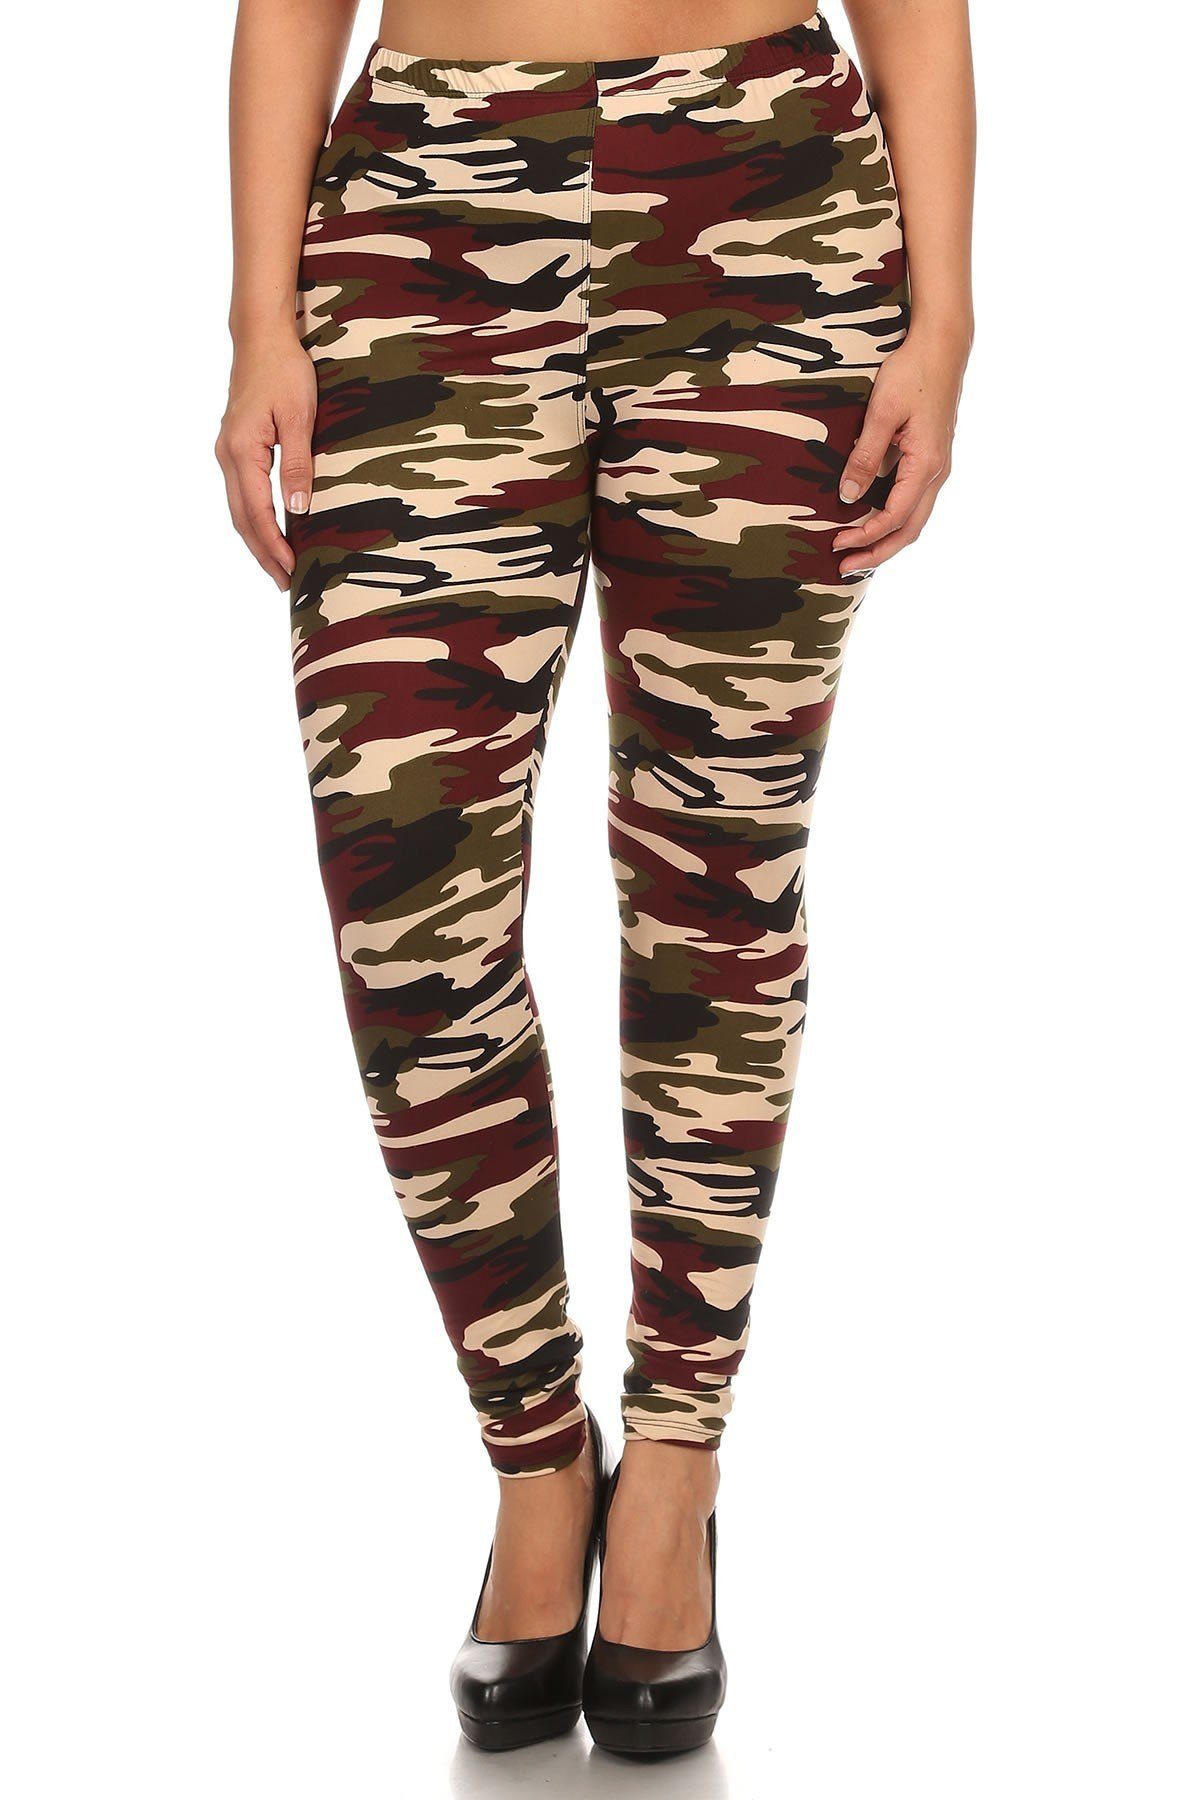 Plus Size Army Print, Banded, Full Length Leggings In A Fitted Style With A High Waist - Fashion Quality Boutik